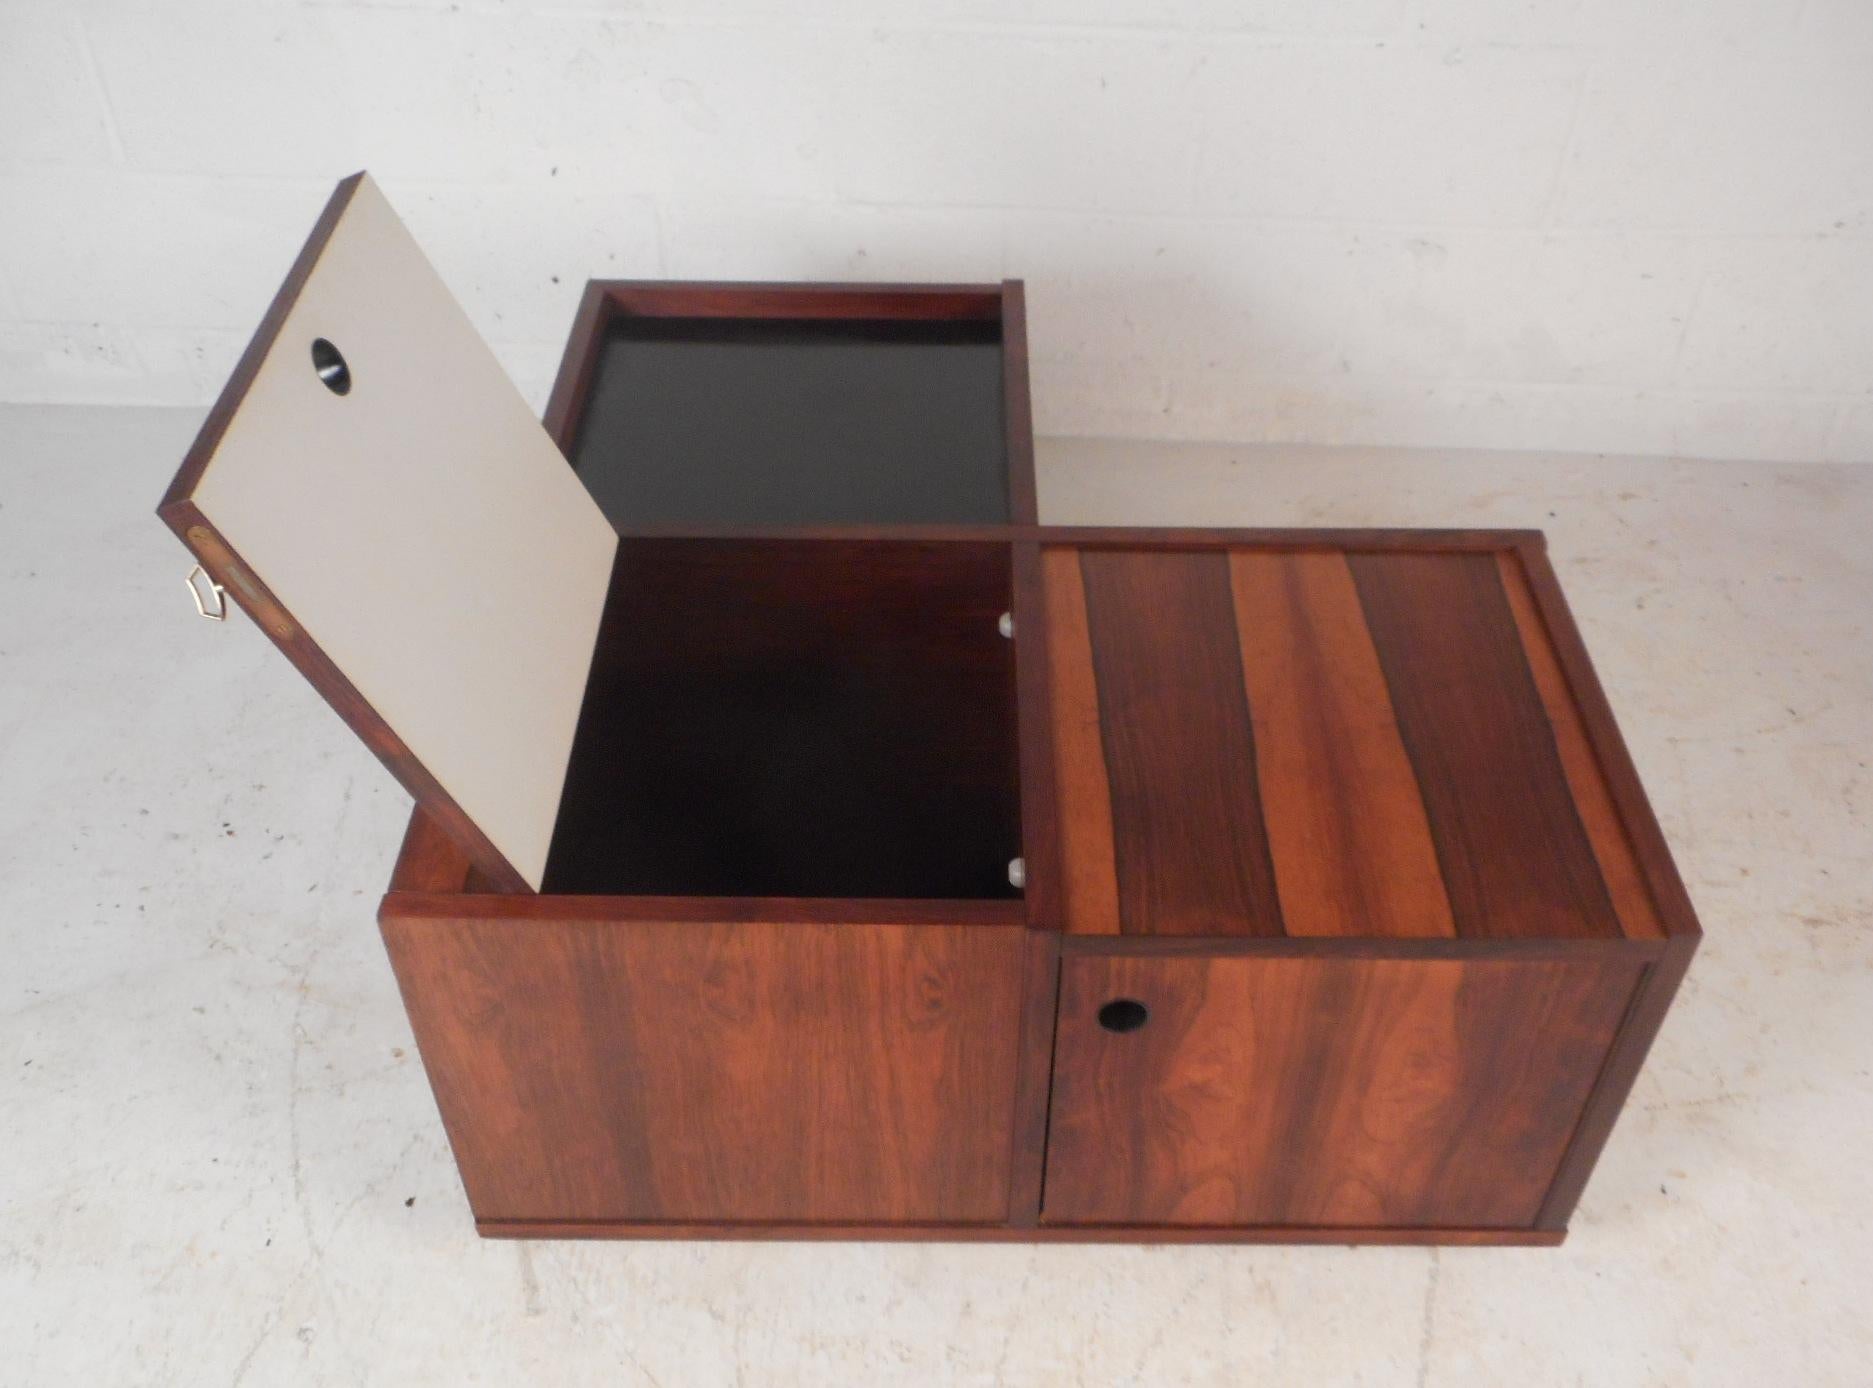 Laminate Midcentury Danish Rosewood Coffee Table or Liquor Cabinet with Folding Tables